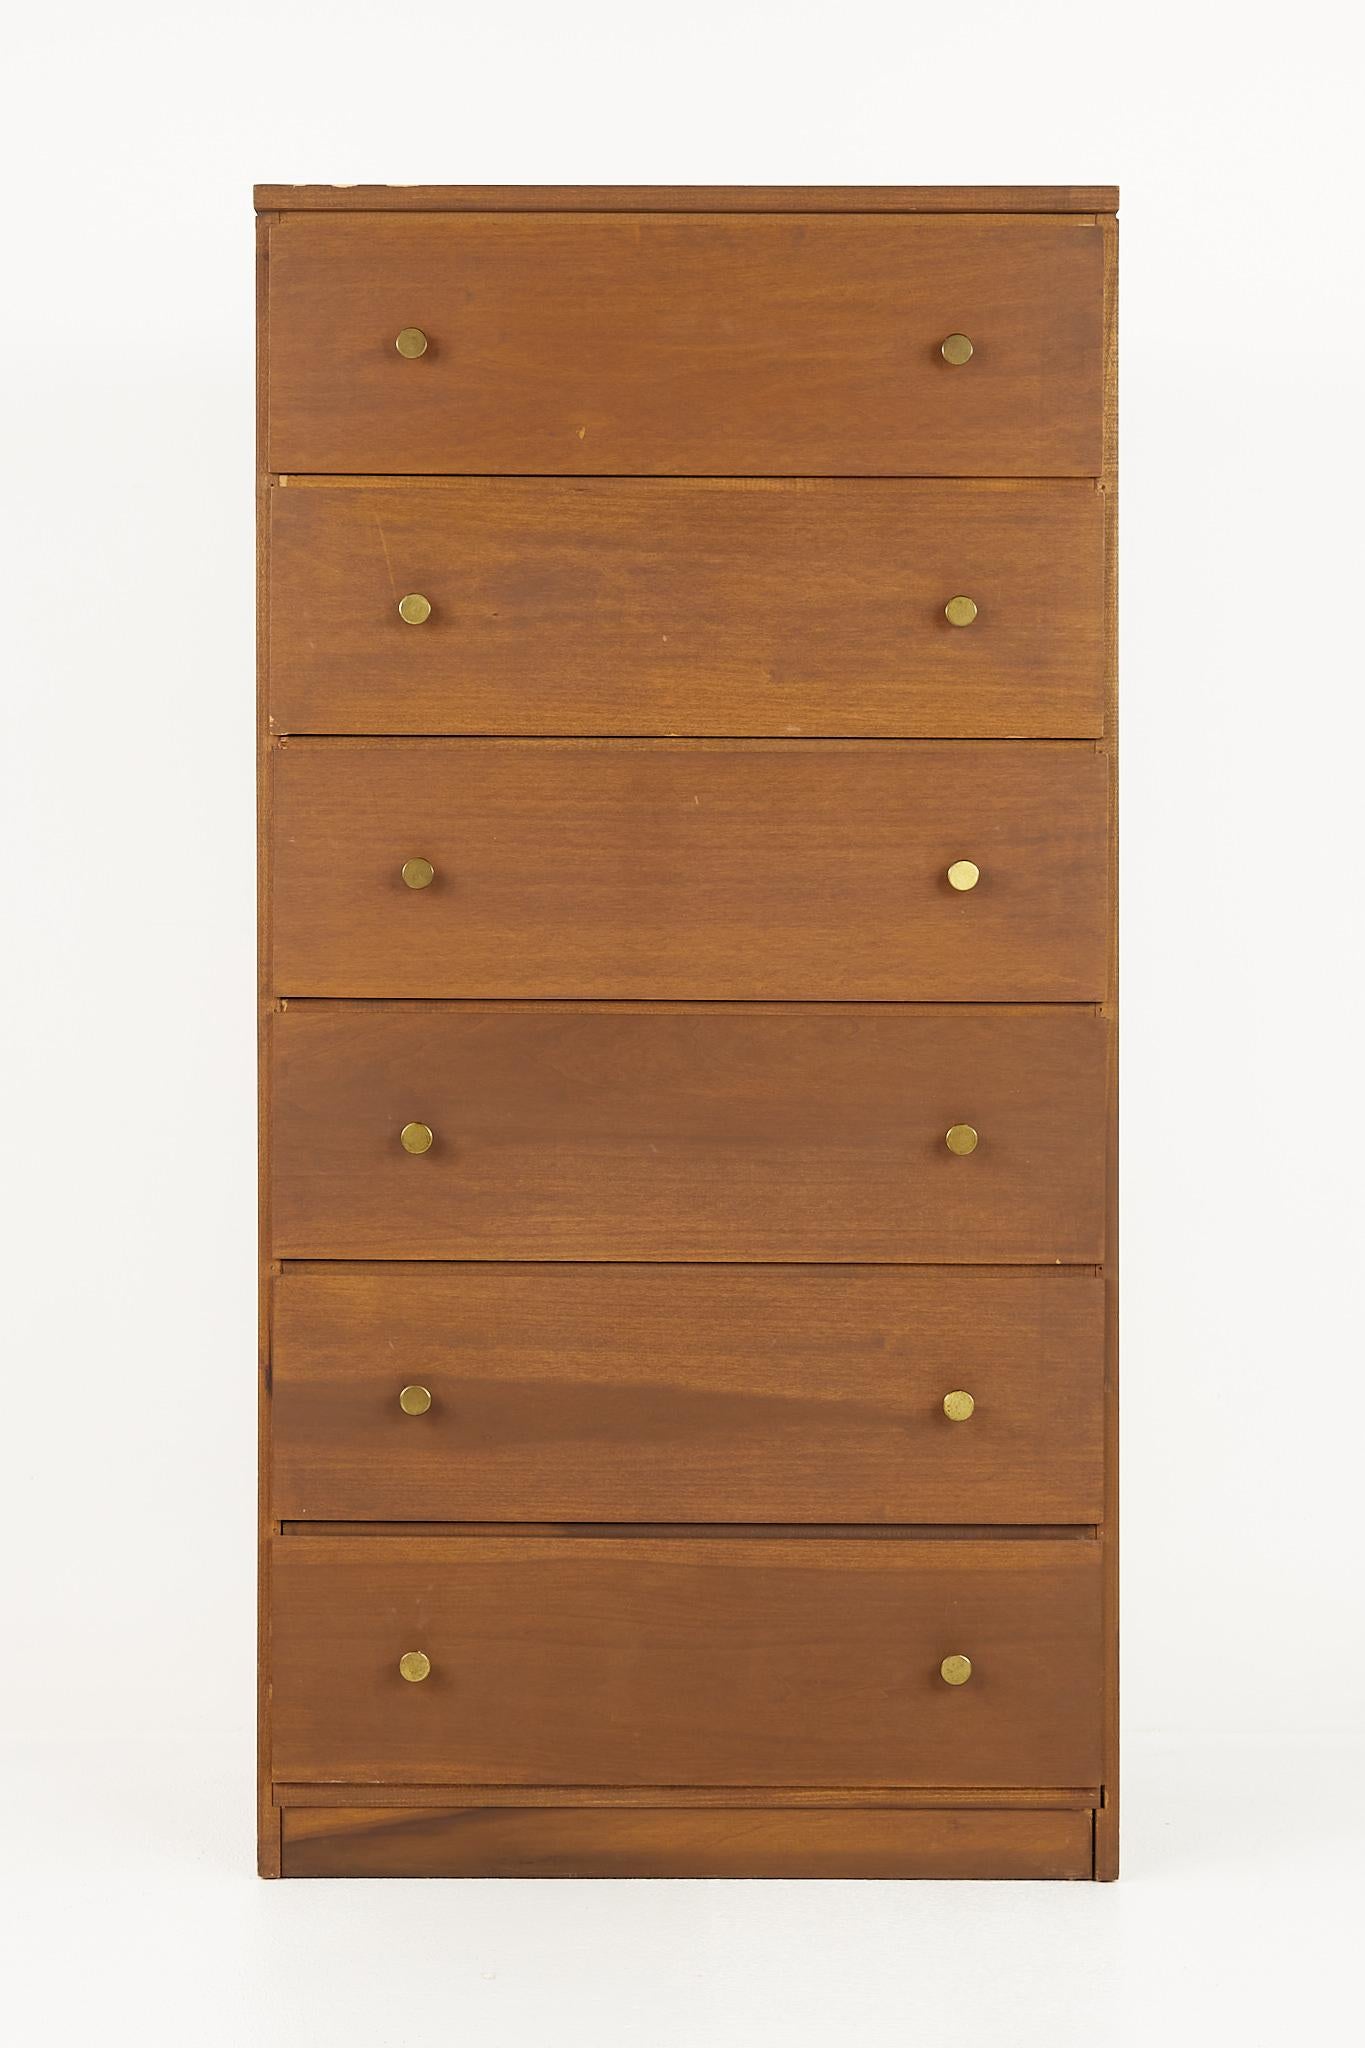 Stanley style mid century walnut and brass 6 drawer highboy dresser

This dresser measures: 27 wide x 16 deep x 53.25 inches high

All pieces of furniture can be had in what we call restored vintage condition. That means the piece is restored